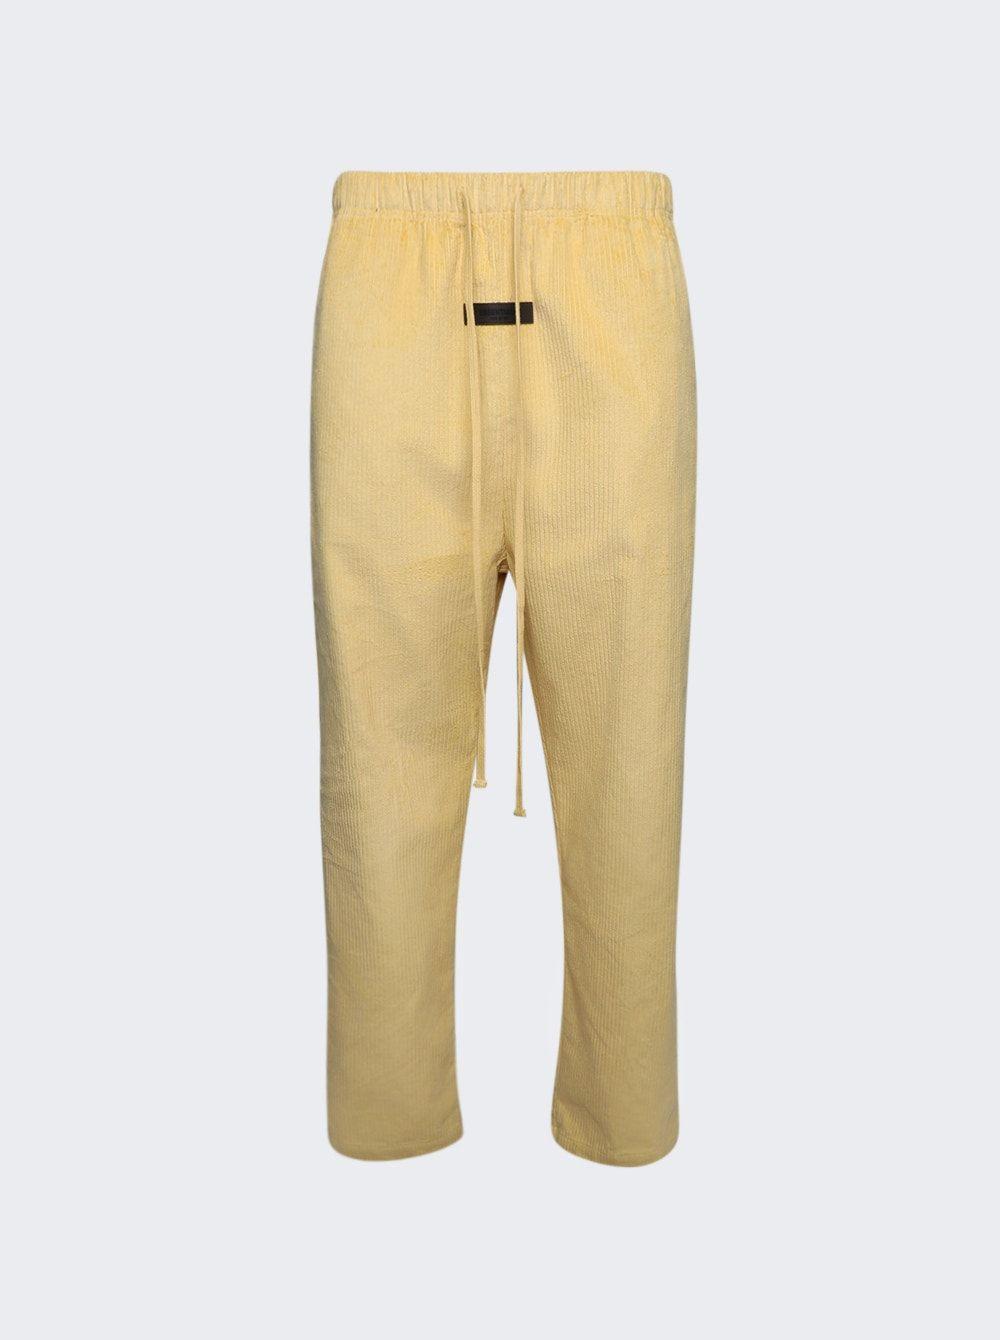 Fear of God ESSENTIALS Relaxed Trouser in Natural for Men | Lyst